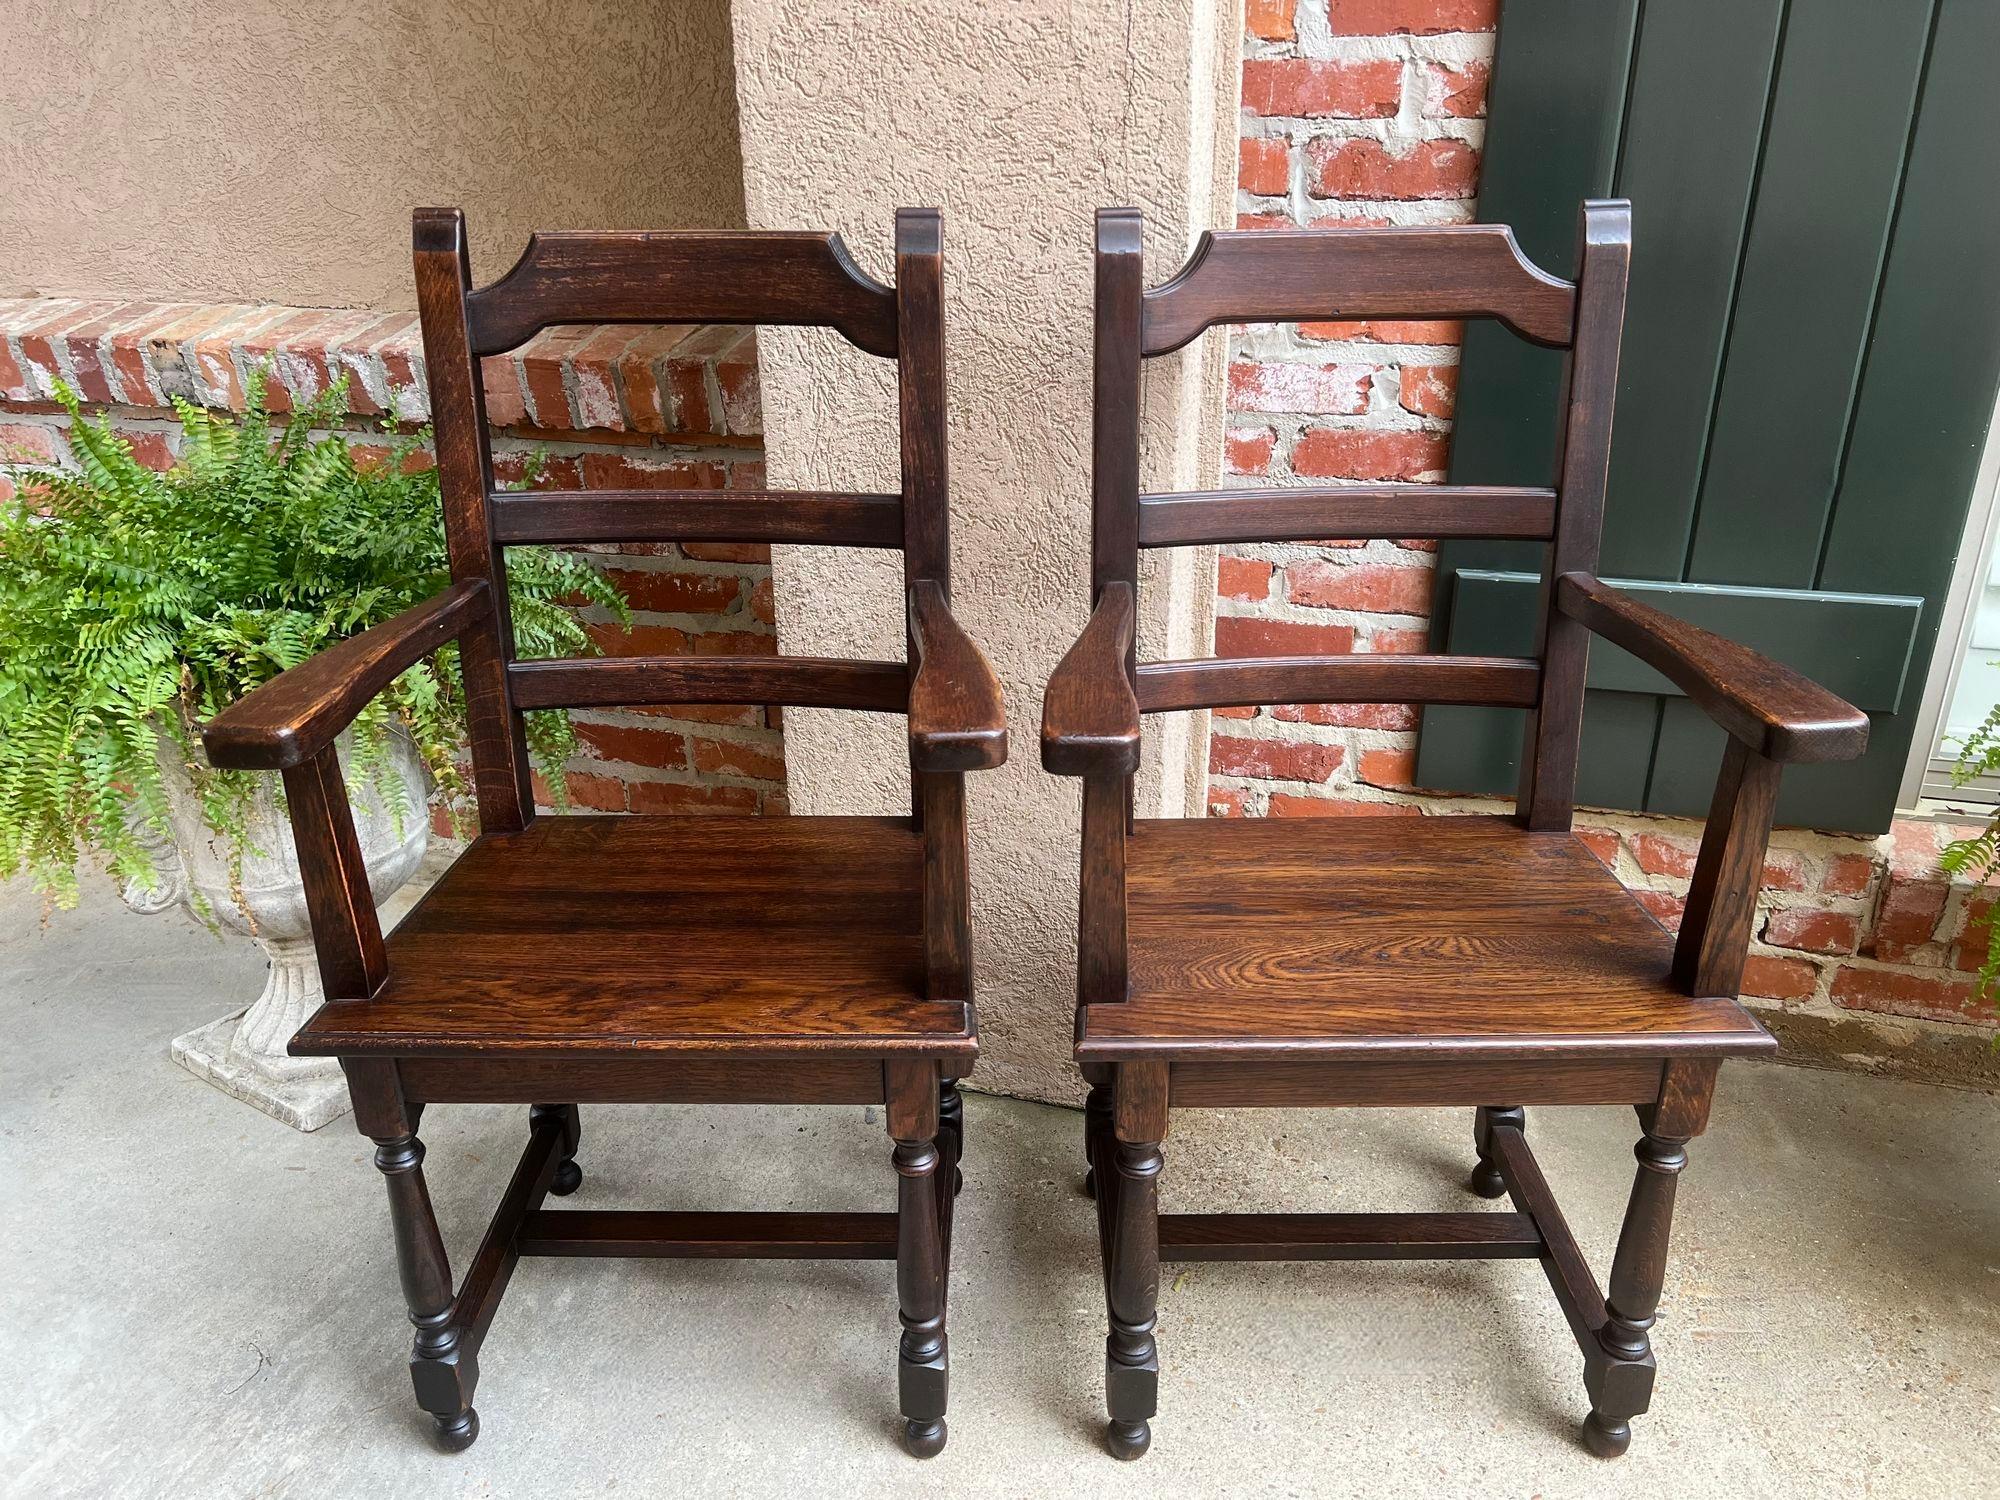 PAIR SET 2 Antique French Arm Dining Chair Ladder Back Carved Dark Oak.

Direct from France, a set of 2antique French arm chairs, with classic French style that compliments any décor! Shaped upper crown with a lovely silhouette that features wide